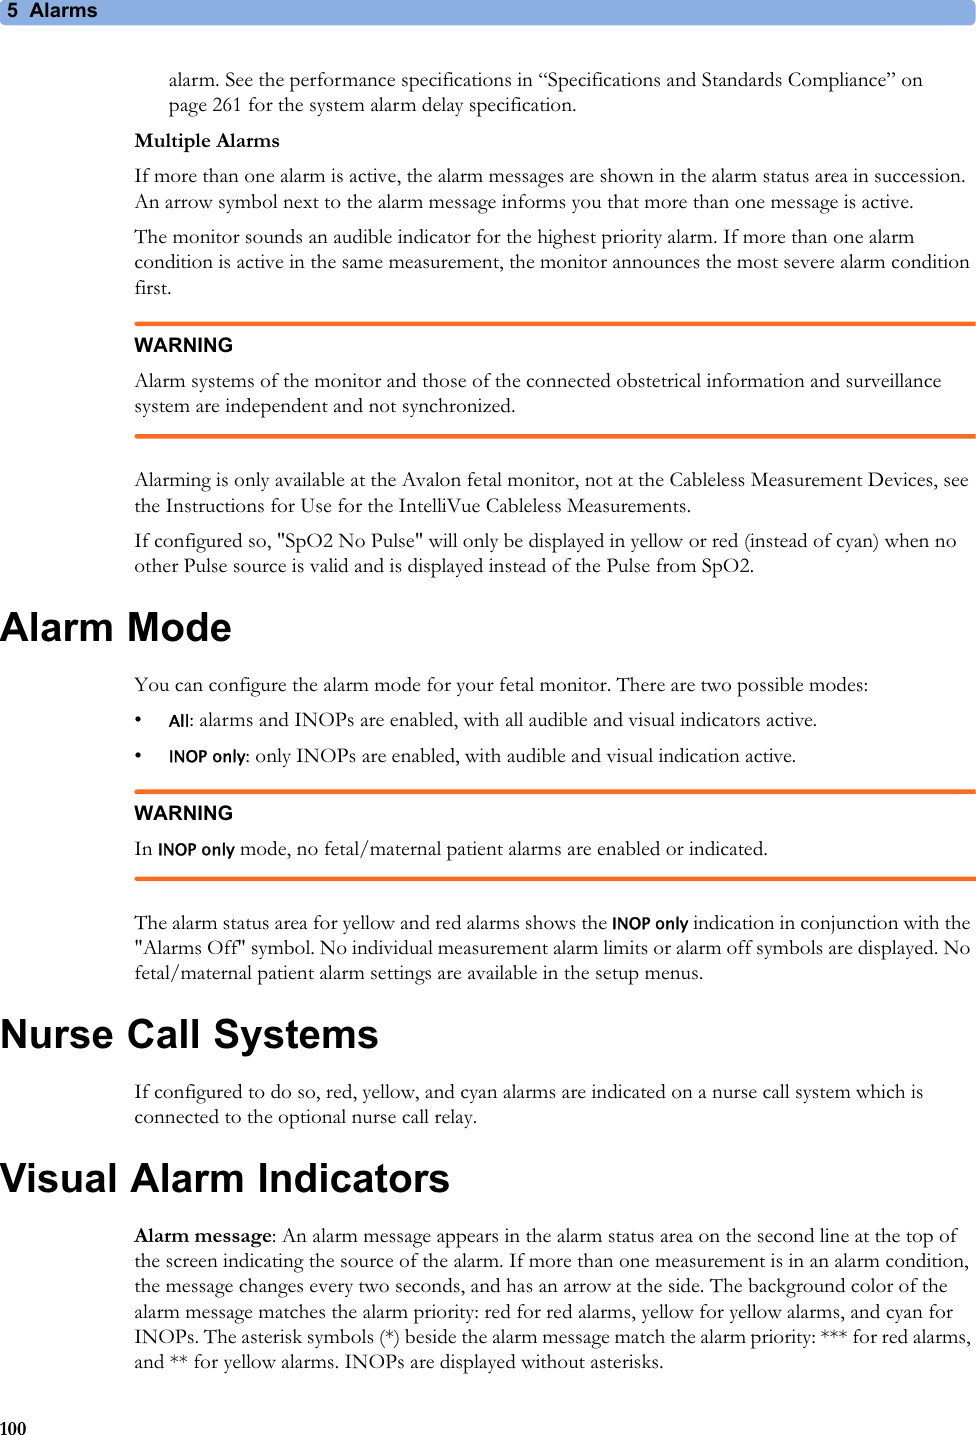 5  Alarms100alarm. See the performance specifications in “Specifications and Standards Compliance” on page 261 for the system alarm delay specification.Multiple AlarmsIf more than one alarm is active, the alarm messages are shown in the alarm status area in succession. An arrow symbol next to the alarm message informs you that more than one message is active.The monitor sounds an audible indicator for the highest priority alarm. If more than one alarm condition is active in the same measurement, the monitor announces the most severe alarm condition first.WARNINGAlarm systems of the monitor and those of the connected obstetrical information and surveillance system are independent and not synchronized.Alarming is only available at the Avalon fetal monitor, not at the Cableless Measurement Devices, see the Instructions for Use for the IntelliVue Cableless Measurements.If configured so, &quot;SpO2 No Pulse&quot; will only be displayed in yellow or red (instead of cyan) when no other Pulse source is valid and is displayed instead of the Pulse from SpO2.Alarm ModeYou can configure the alarm mode for your fetal monitor. There are two possible modes:•All: alarms and INOPs are enabled, with all audible and visual indicators active.•INOP only: only INOPs are enabled, with audible and visual indication active. WARNINGIn INOP only mode, no fetal/maternal patient alarms are enabled or indicated.The alarm status area for yellow and red alarms shows the INOP only indication in conjunction with the &quot;Alarms Off&quot; symbol. No individual measurement alarm limits or alarm off symbols are displayed. No fetal/maternal patient alarm settings are available in the setup menus.Nurse Call SystemsIf configured to do so, red, yellow, and cyan alarms are indicated on a nurse call system which is connected to the optional nurse call relay.Visual Alarm IndicatorsAlarm message: An alarm message appears in the alarm status area on the second line at the top of the screen indicating the source of the alarm. If more than one measurement is in an alarm condition, the message changes every two seconds, and has an arrow at the side. The background color of the alarm message matches the alarm priority: red for red alarms, yellow for yellow alarms, and cyan for INOPs. The asterisk symbols (*) beside the alarm message match the alarm priority: *** for red alarms, and ** for yellow alarms. INOPs are displayed without asterisks.